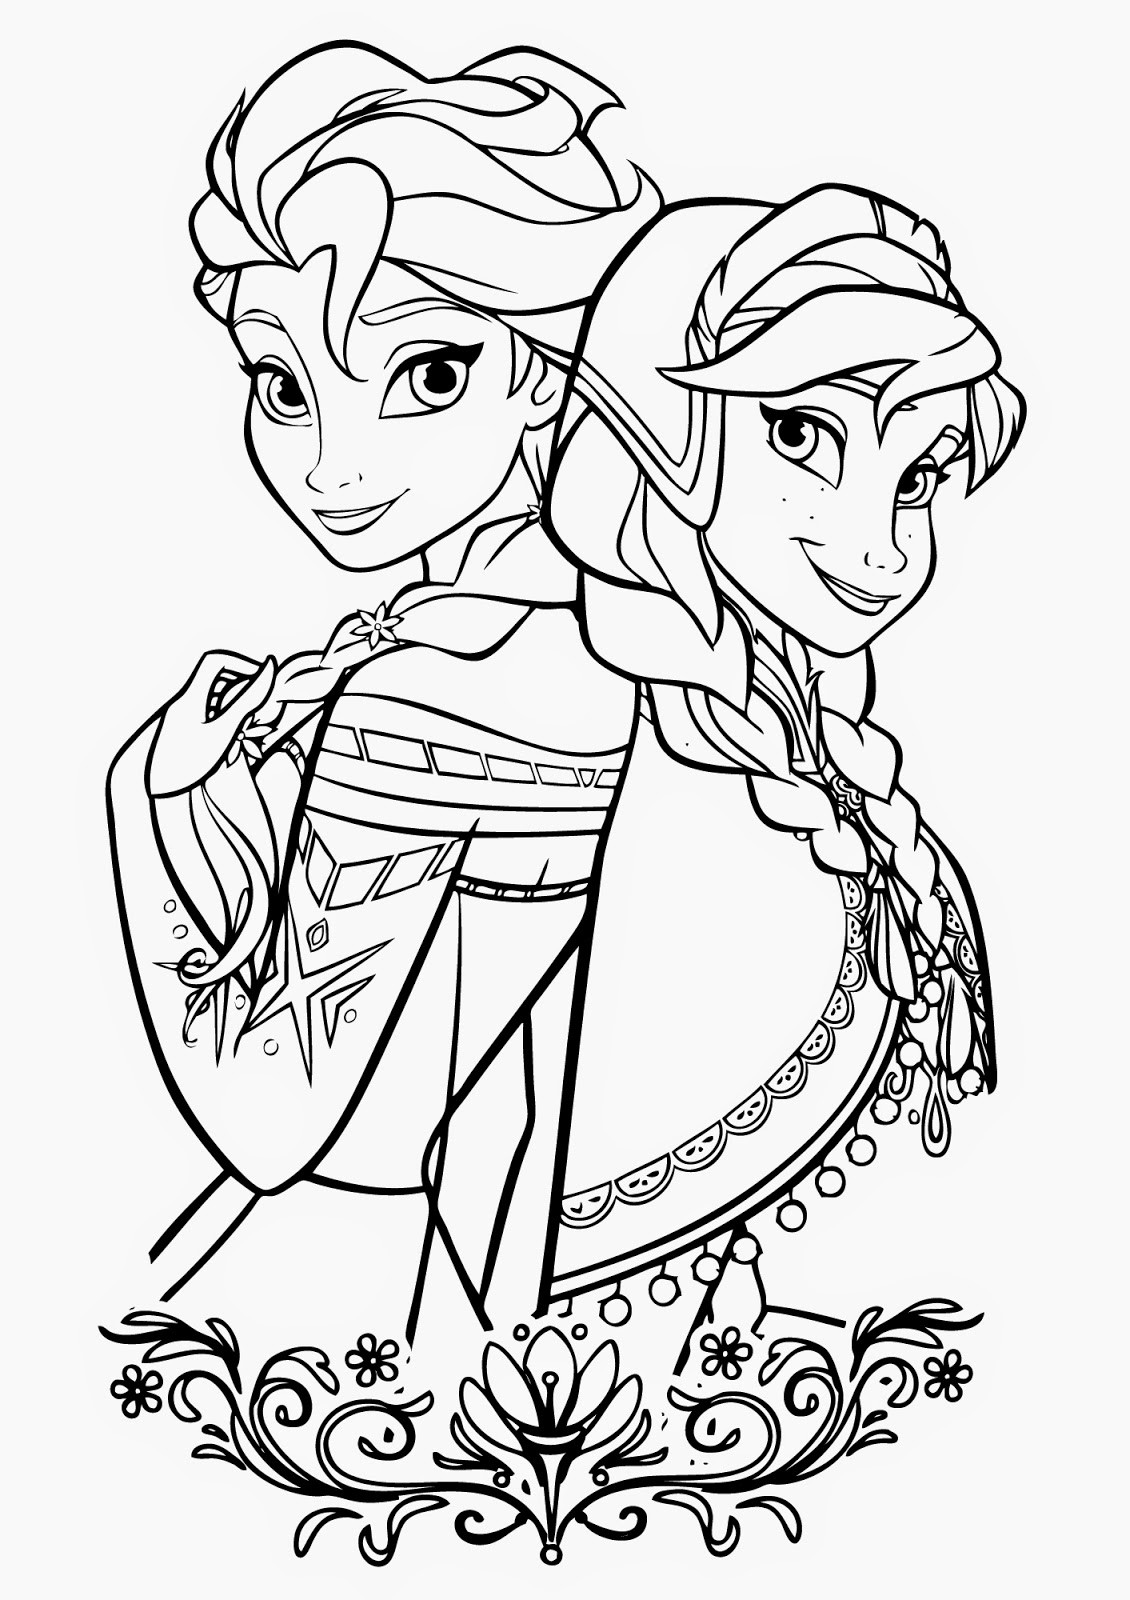 Coloring Pages Printable Disney
 15 Beautiful Disney Frozen Coloring Pages Free Instant